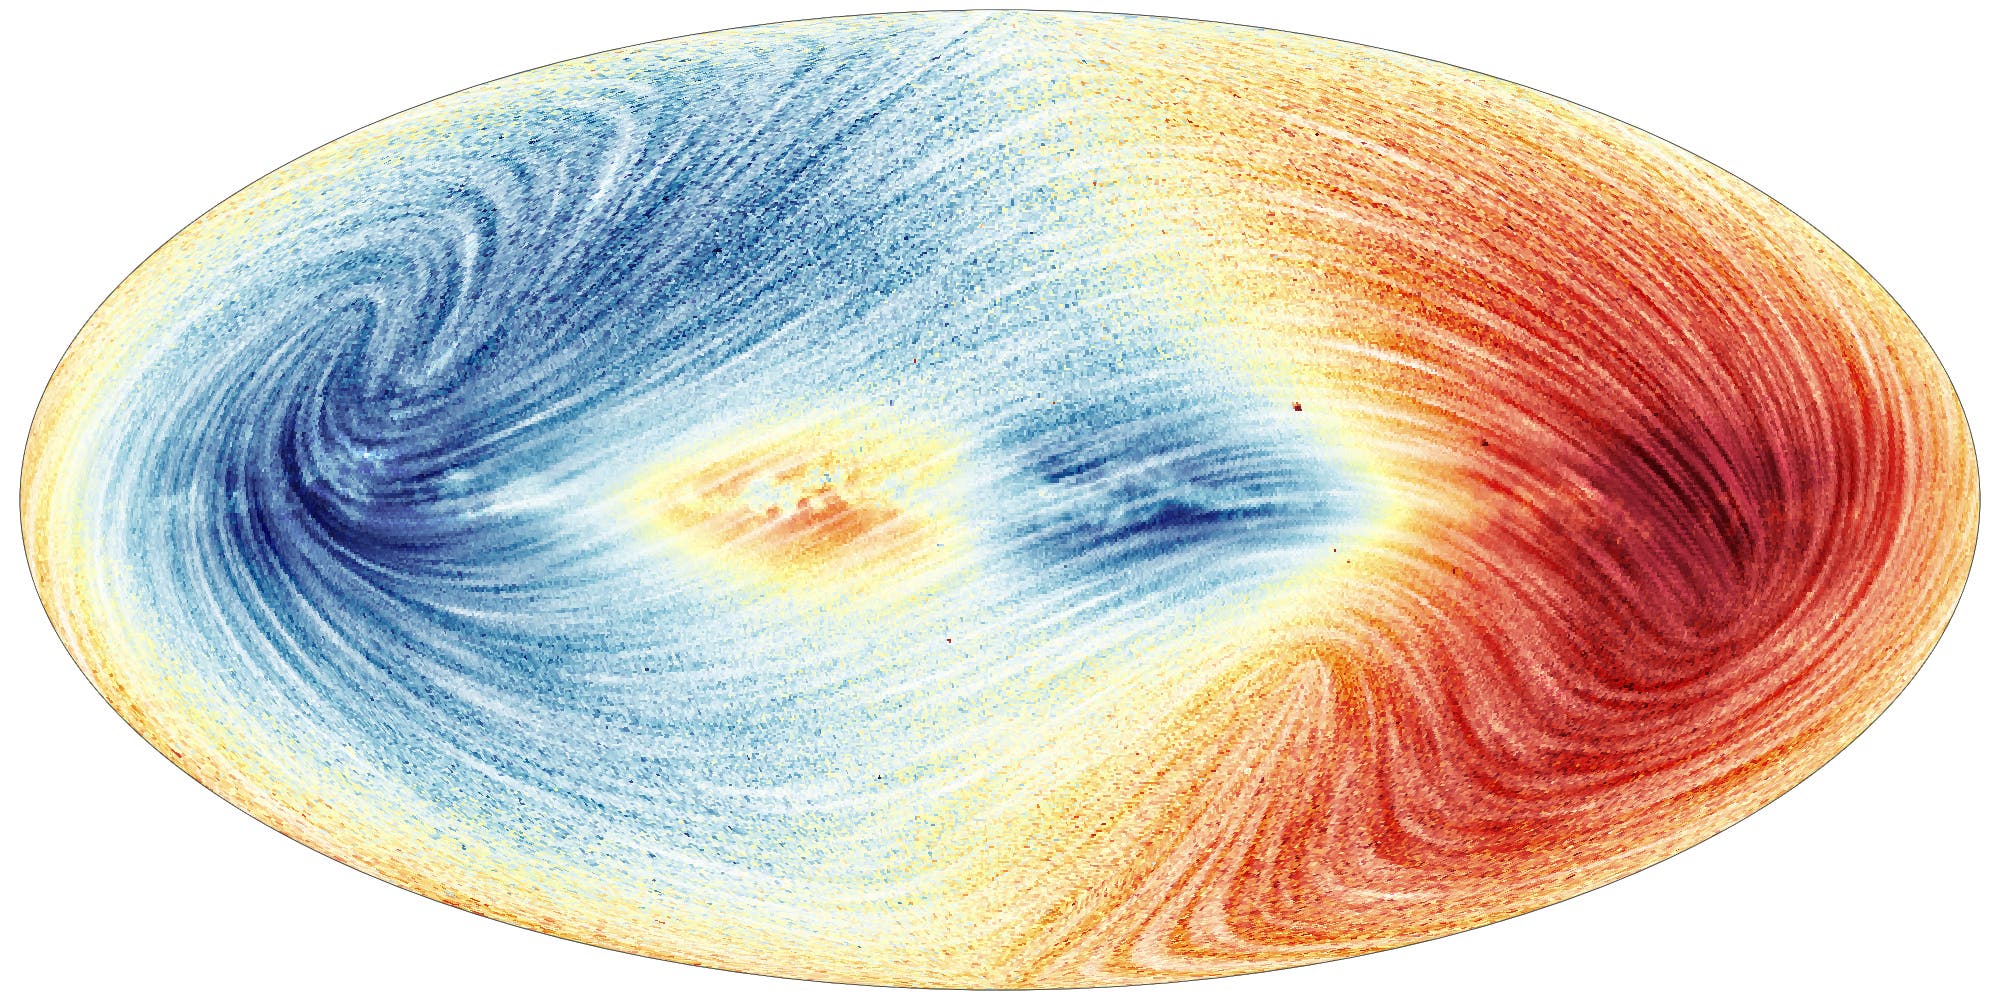 This handout image released by the European Space Agency (ESA) on June 13, 2022, shows a map of the Milky Way made with new data collected by the ESA space probe Gaia, showing the galaxy's radial velocity and proper motion, the velocity field of the Milky Way for ~26 million stars